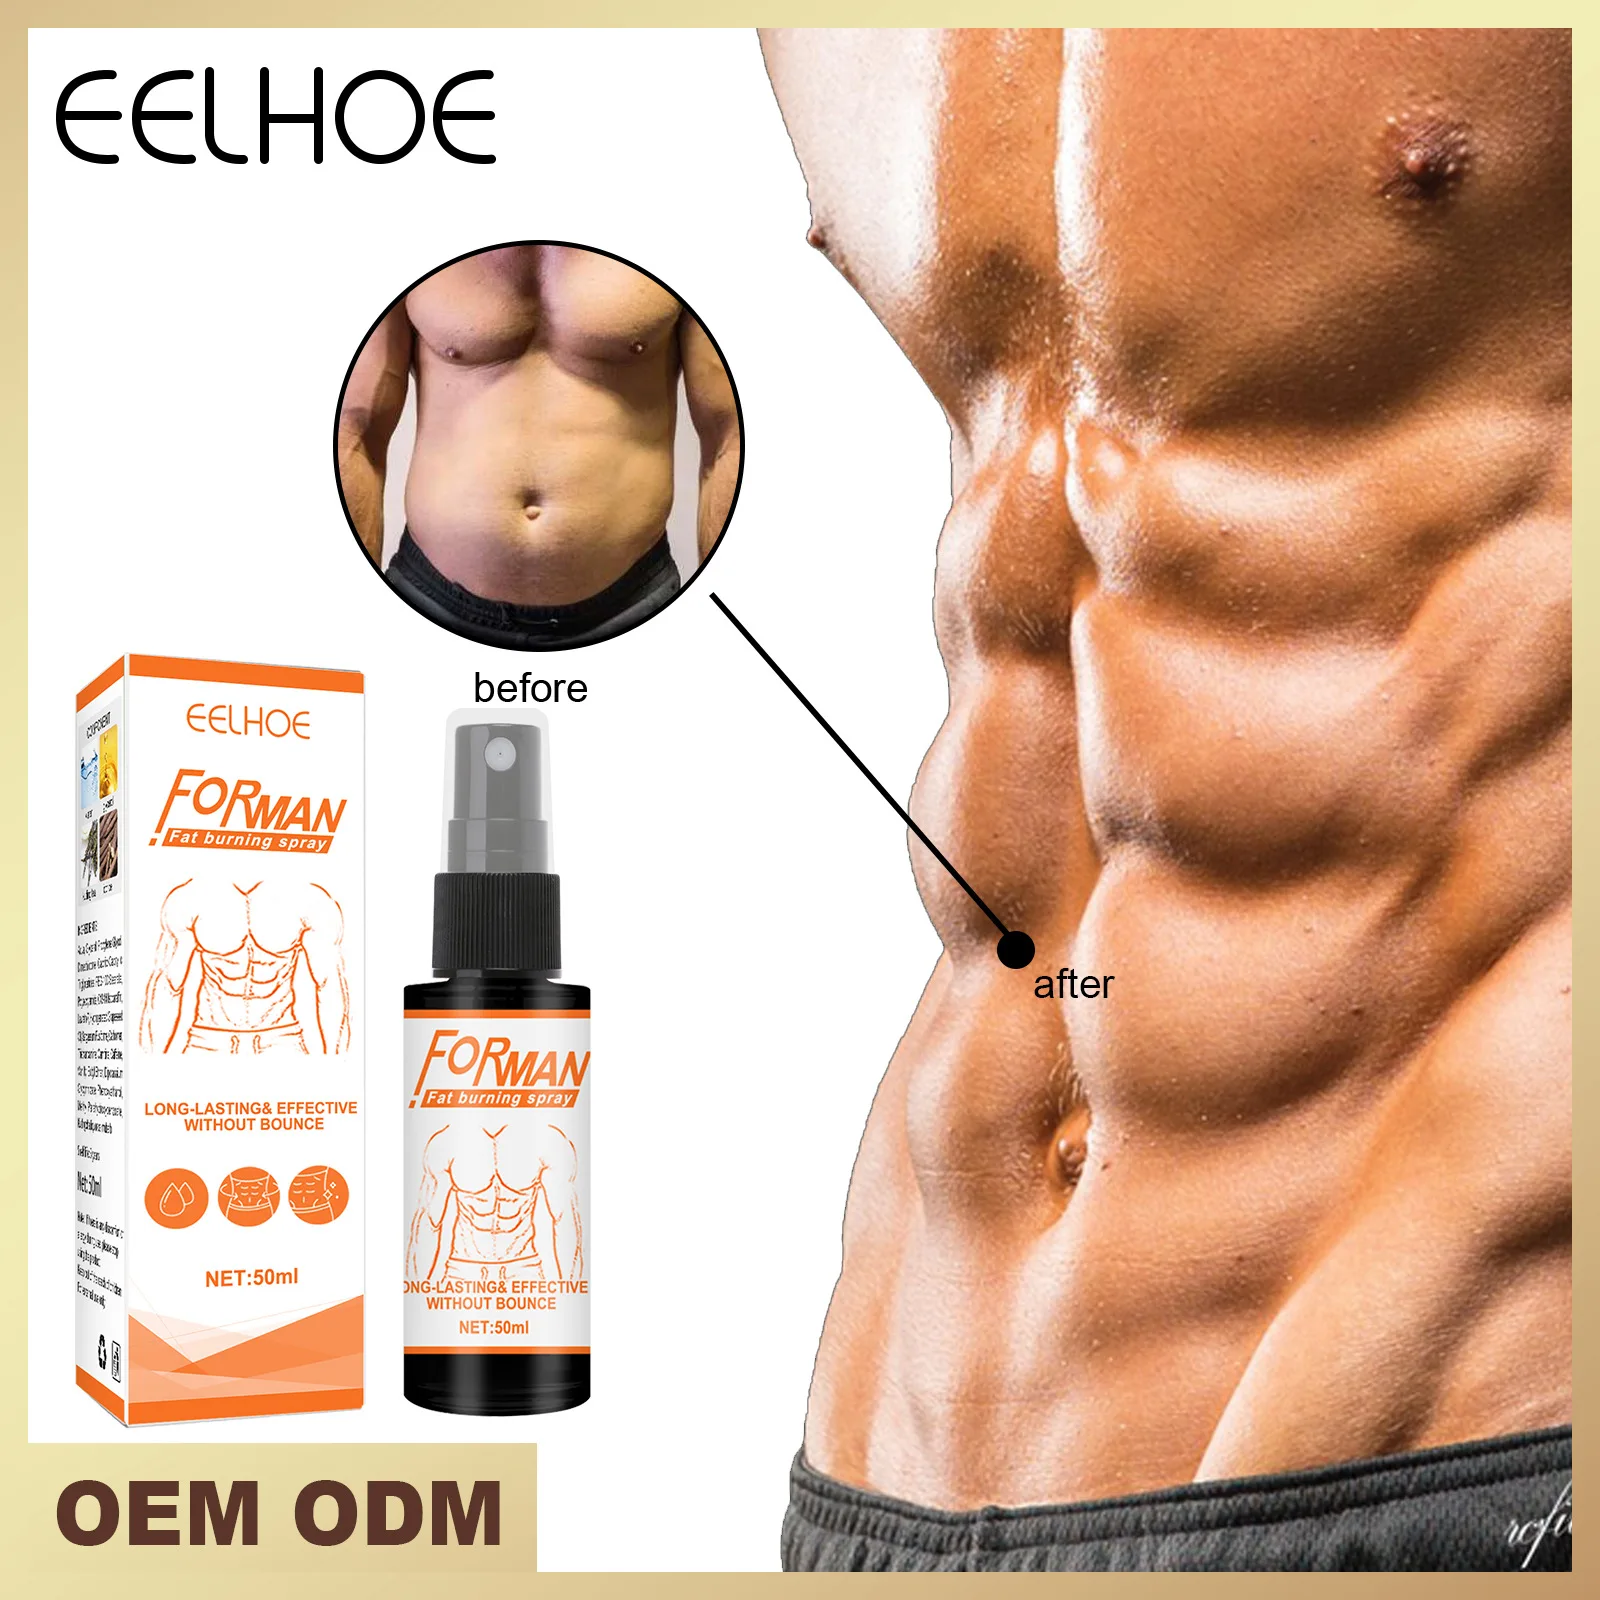 

Eelhoe Men's Abdominal Muscle Spray Local Perspiration Strengthening Belly Fitness Shaping Exercise Oil Abdominal Muscle Spray